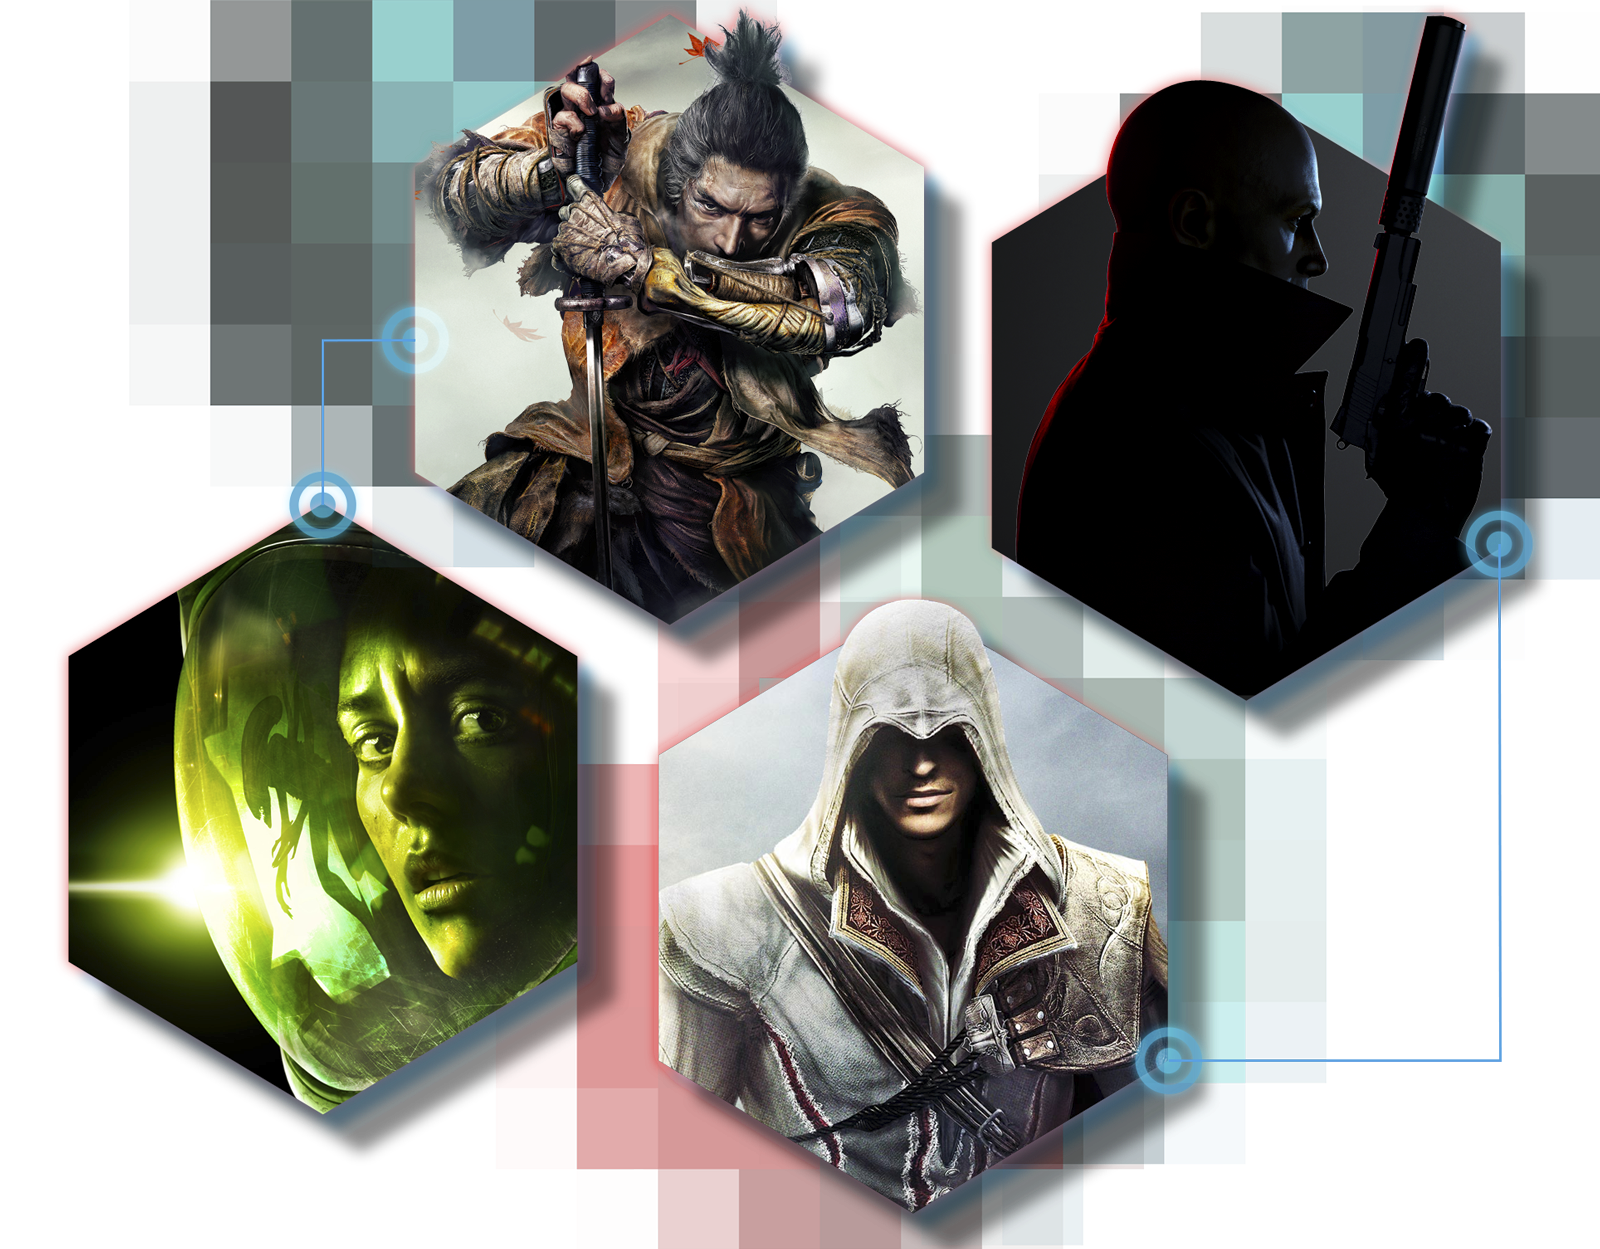 Stealth games promotional imagery featuring artwork from Sekiro: Shadows Die Twice, Hitman 3, Alien: Isolation and Assassin's Creed: The Ezio Collection.